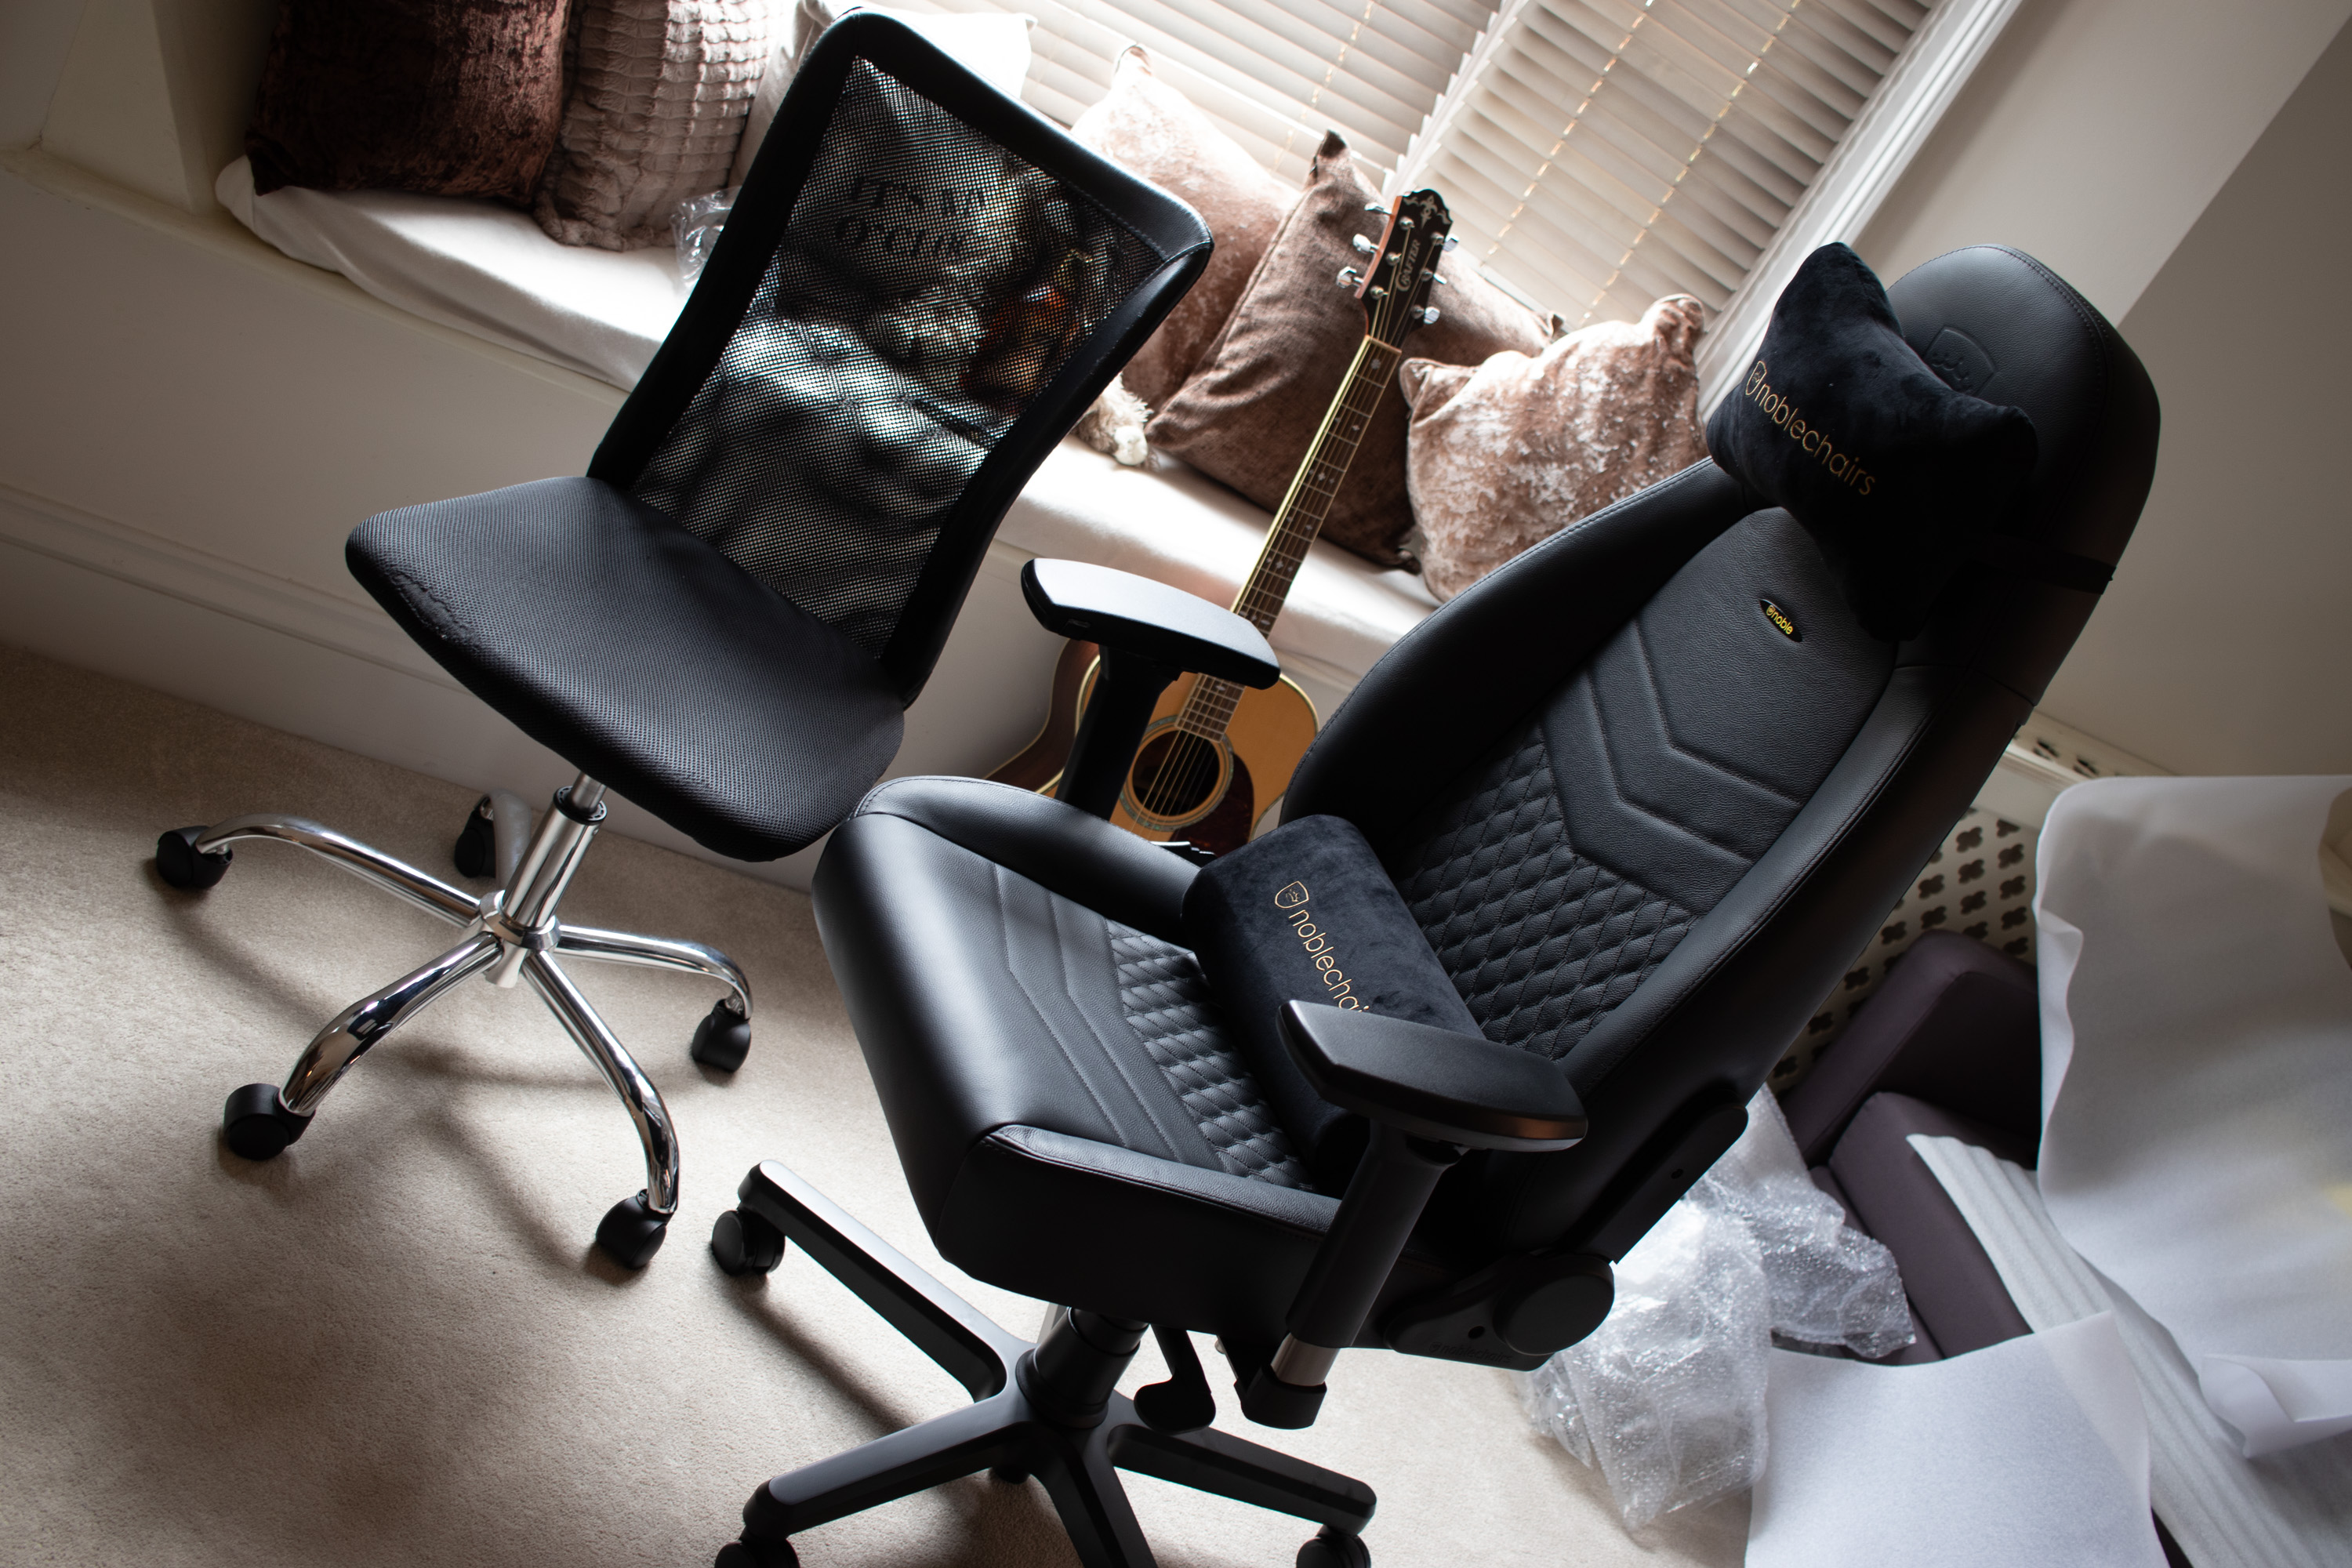 https://www.honestlyreviewed.co.uk/wp-content/uploads/2019/06/Noblechairs-Icon-Gaming-Chair-Real-Leather-Review-Comparison.jpg